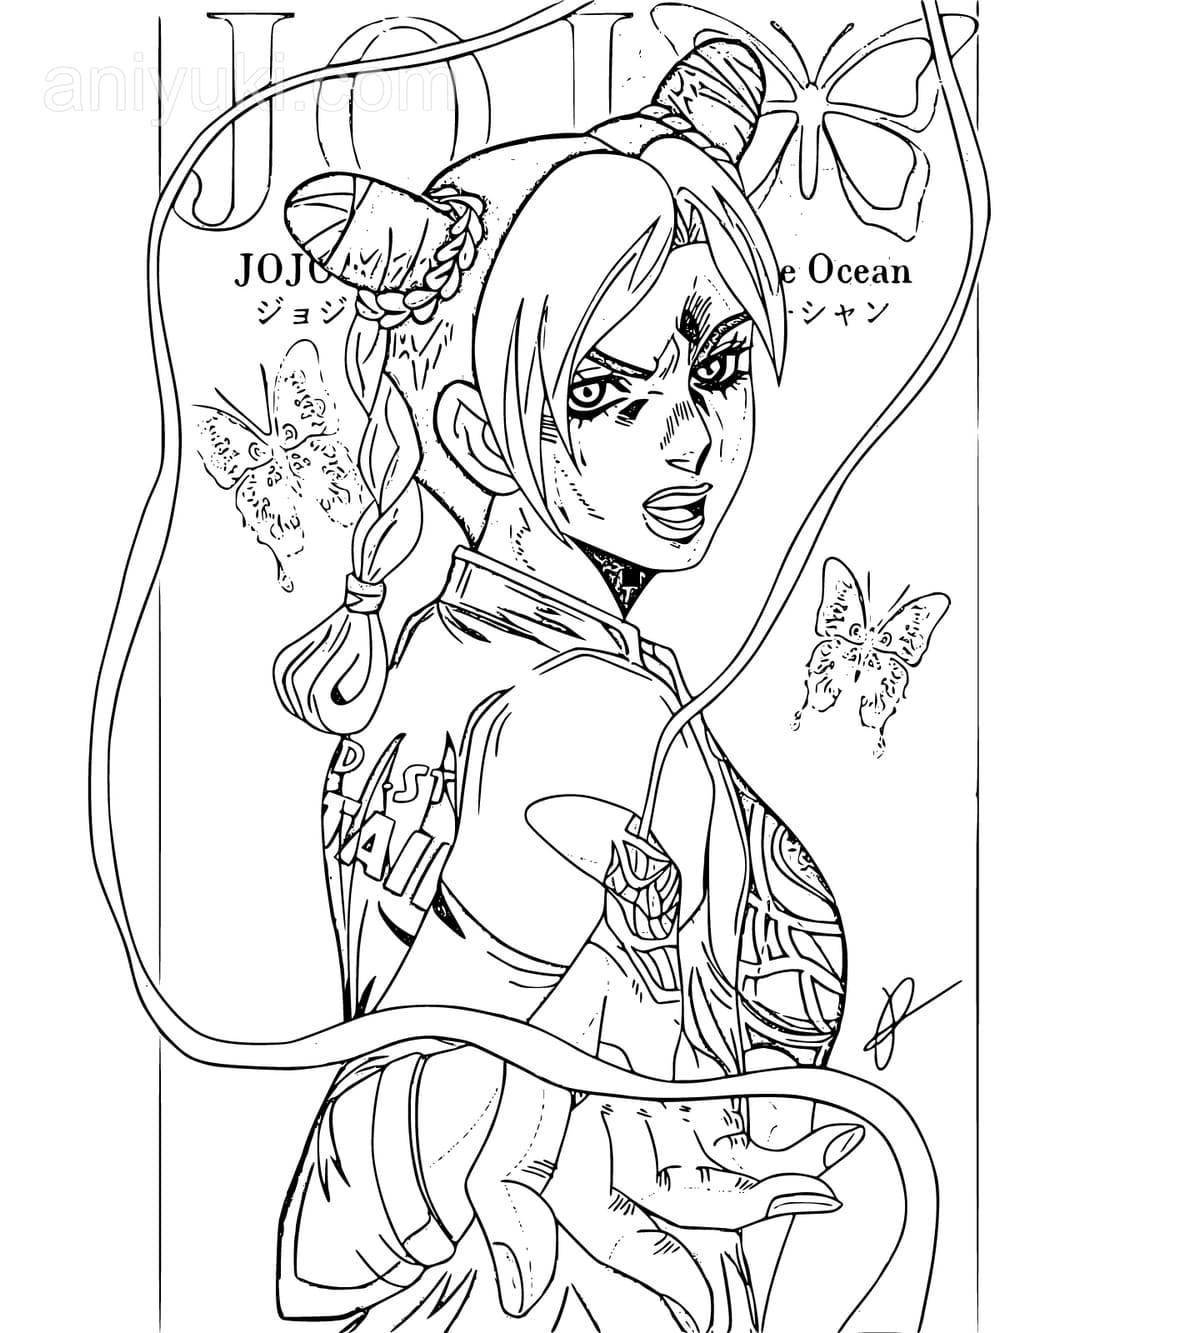 Jolene coloring page